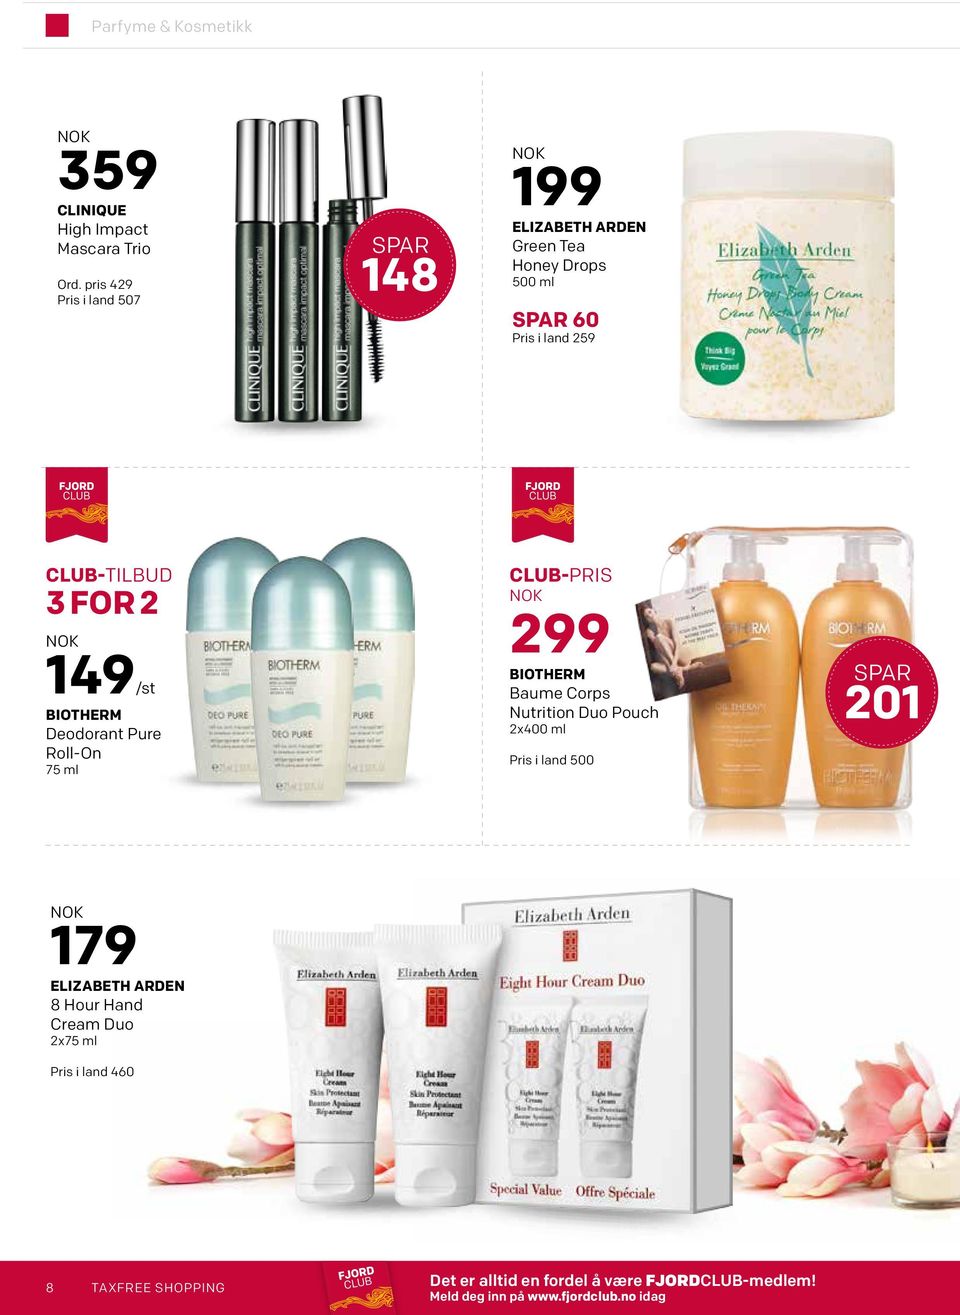 2 149/st BIOTHERM Deodorant Pure Roll-On 75 ml CLUB-PRIS 299 BIOTHERM Baume Corps Nutrition Duo Pouch 2x400 ml Pris